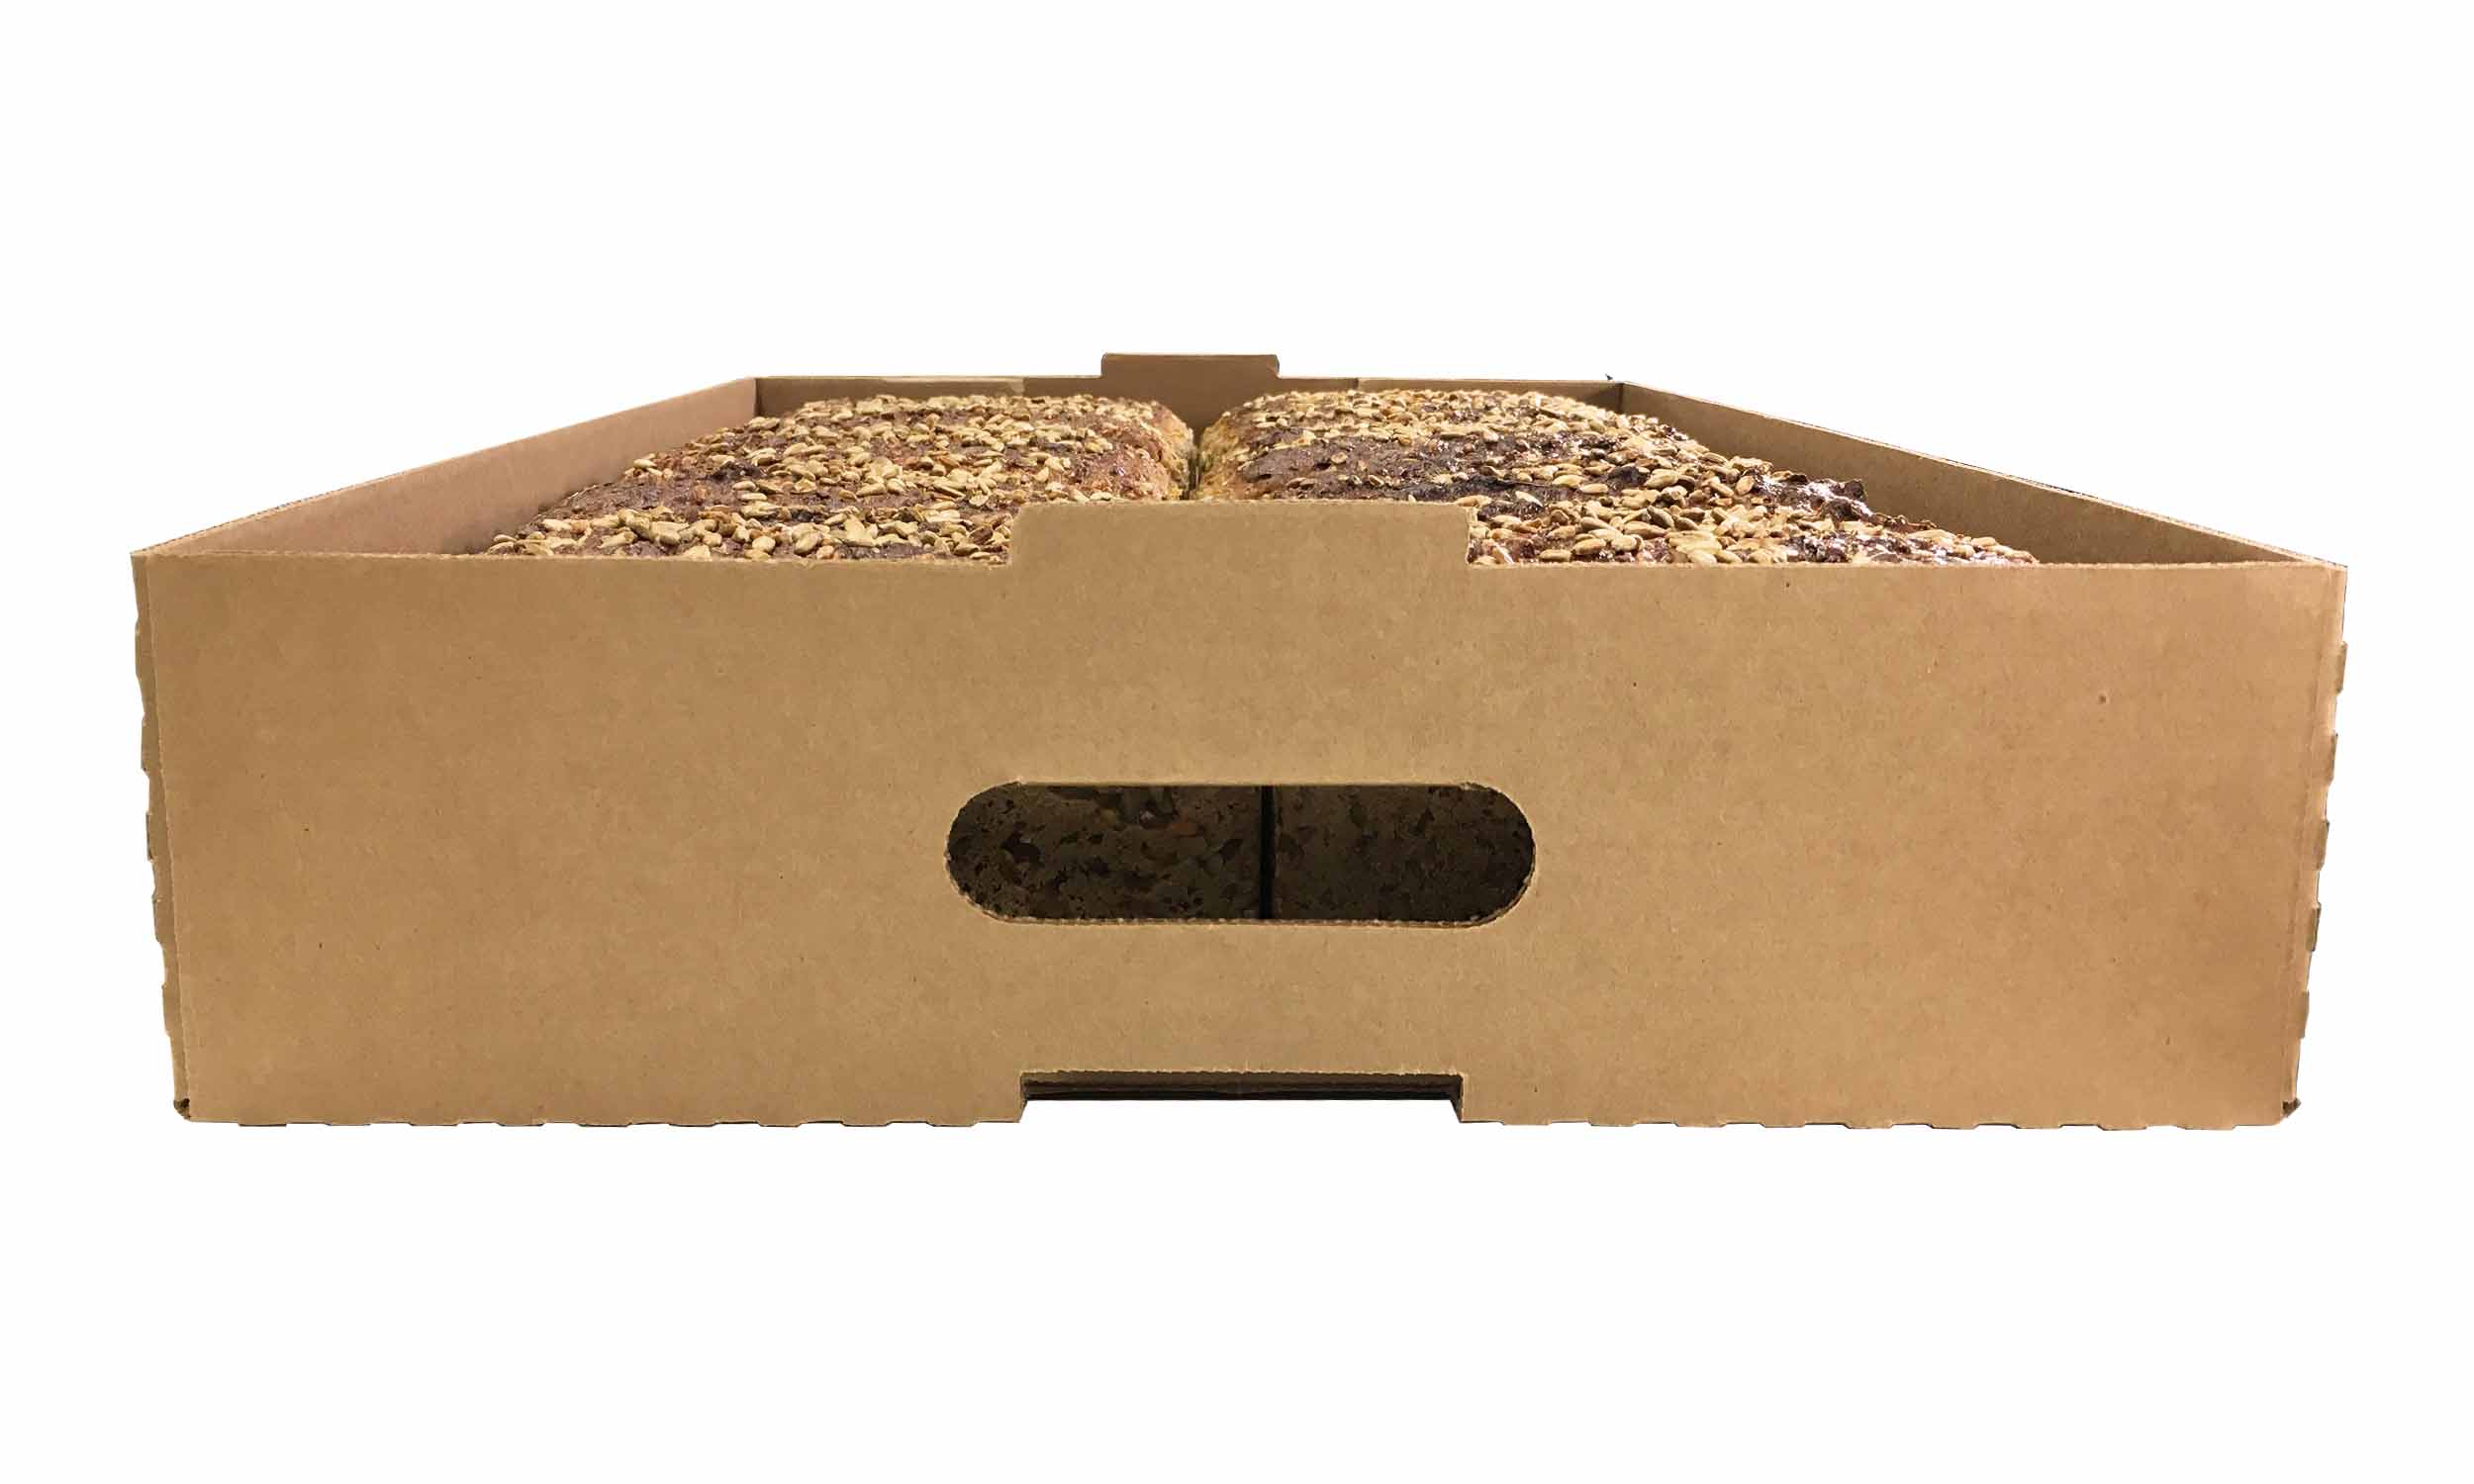 Stackable corrugated cardboard baking trays